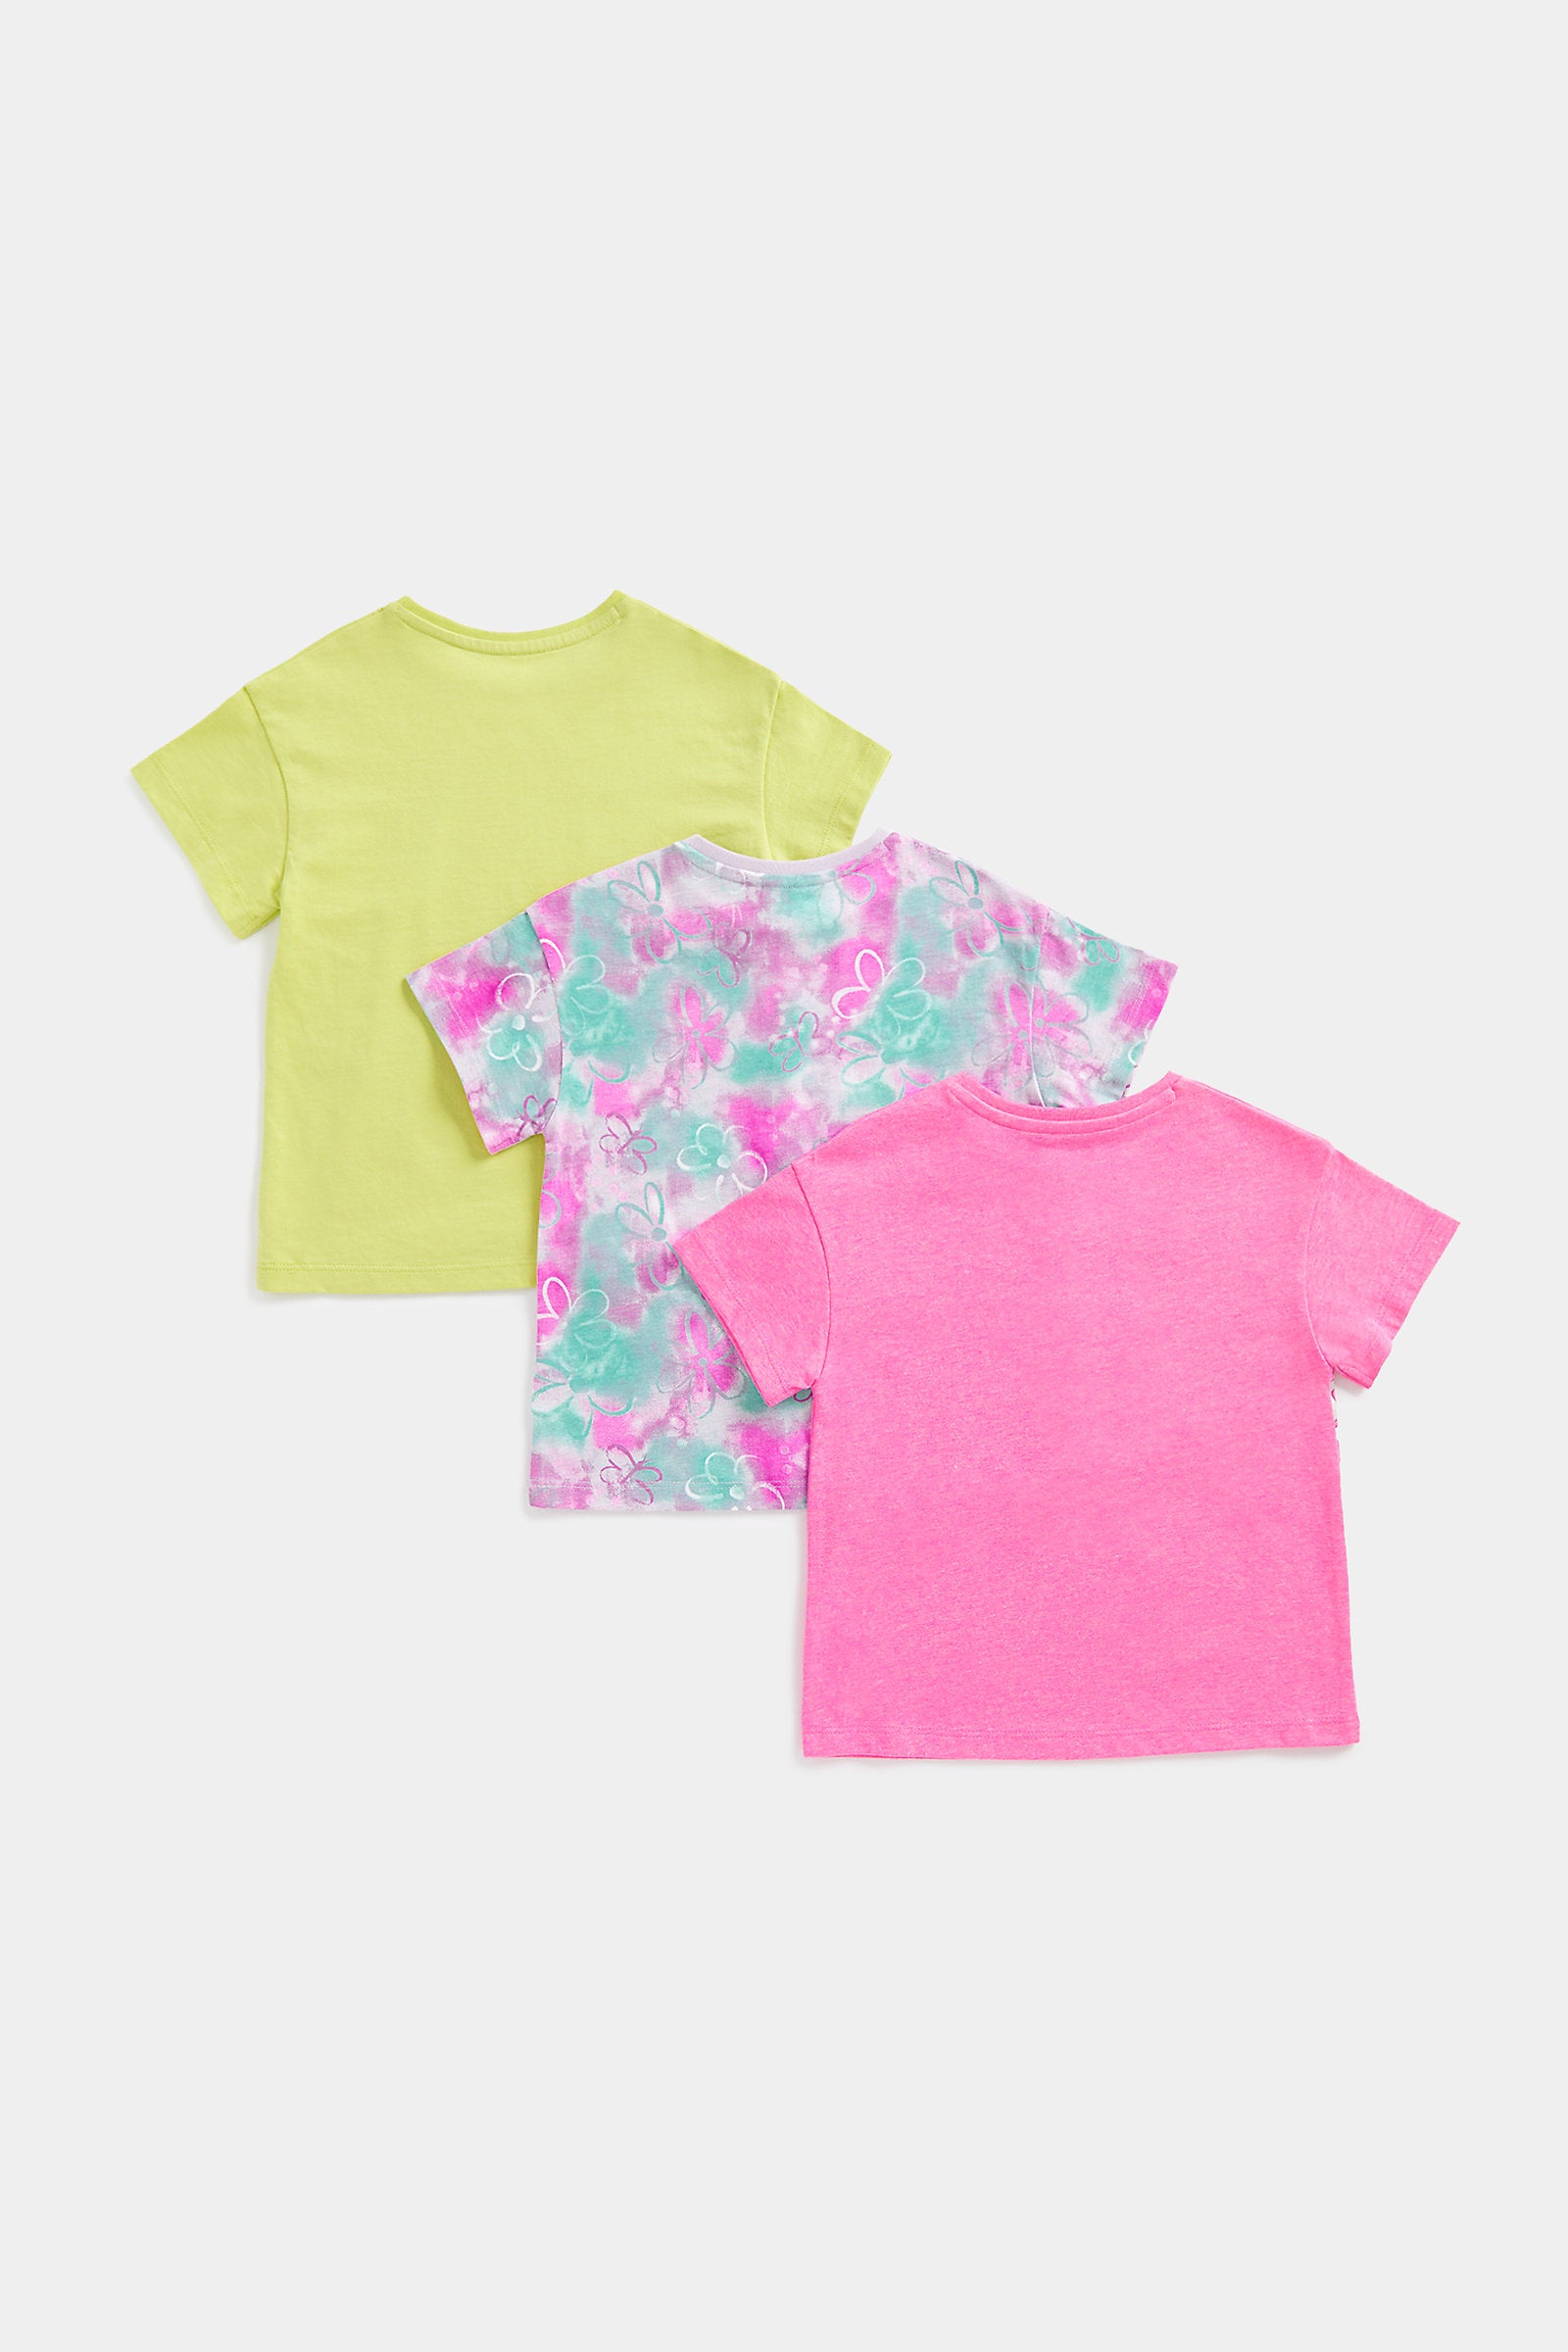 Mothercare Festival T-Shirts - 3 Pack